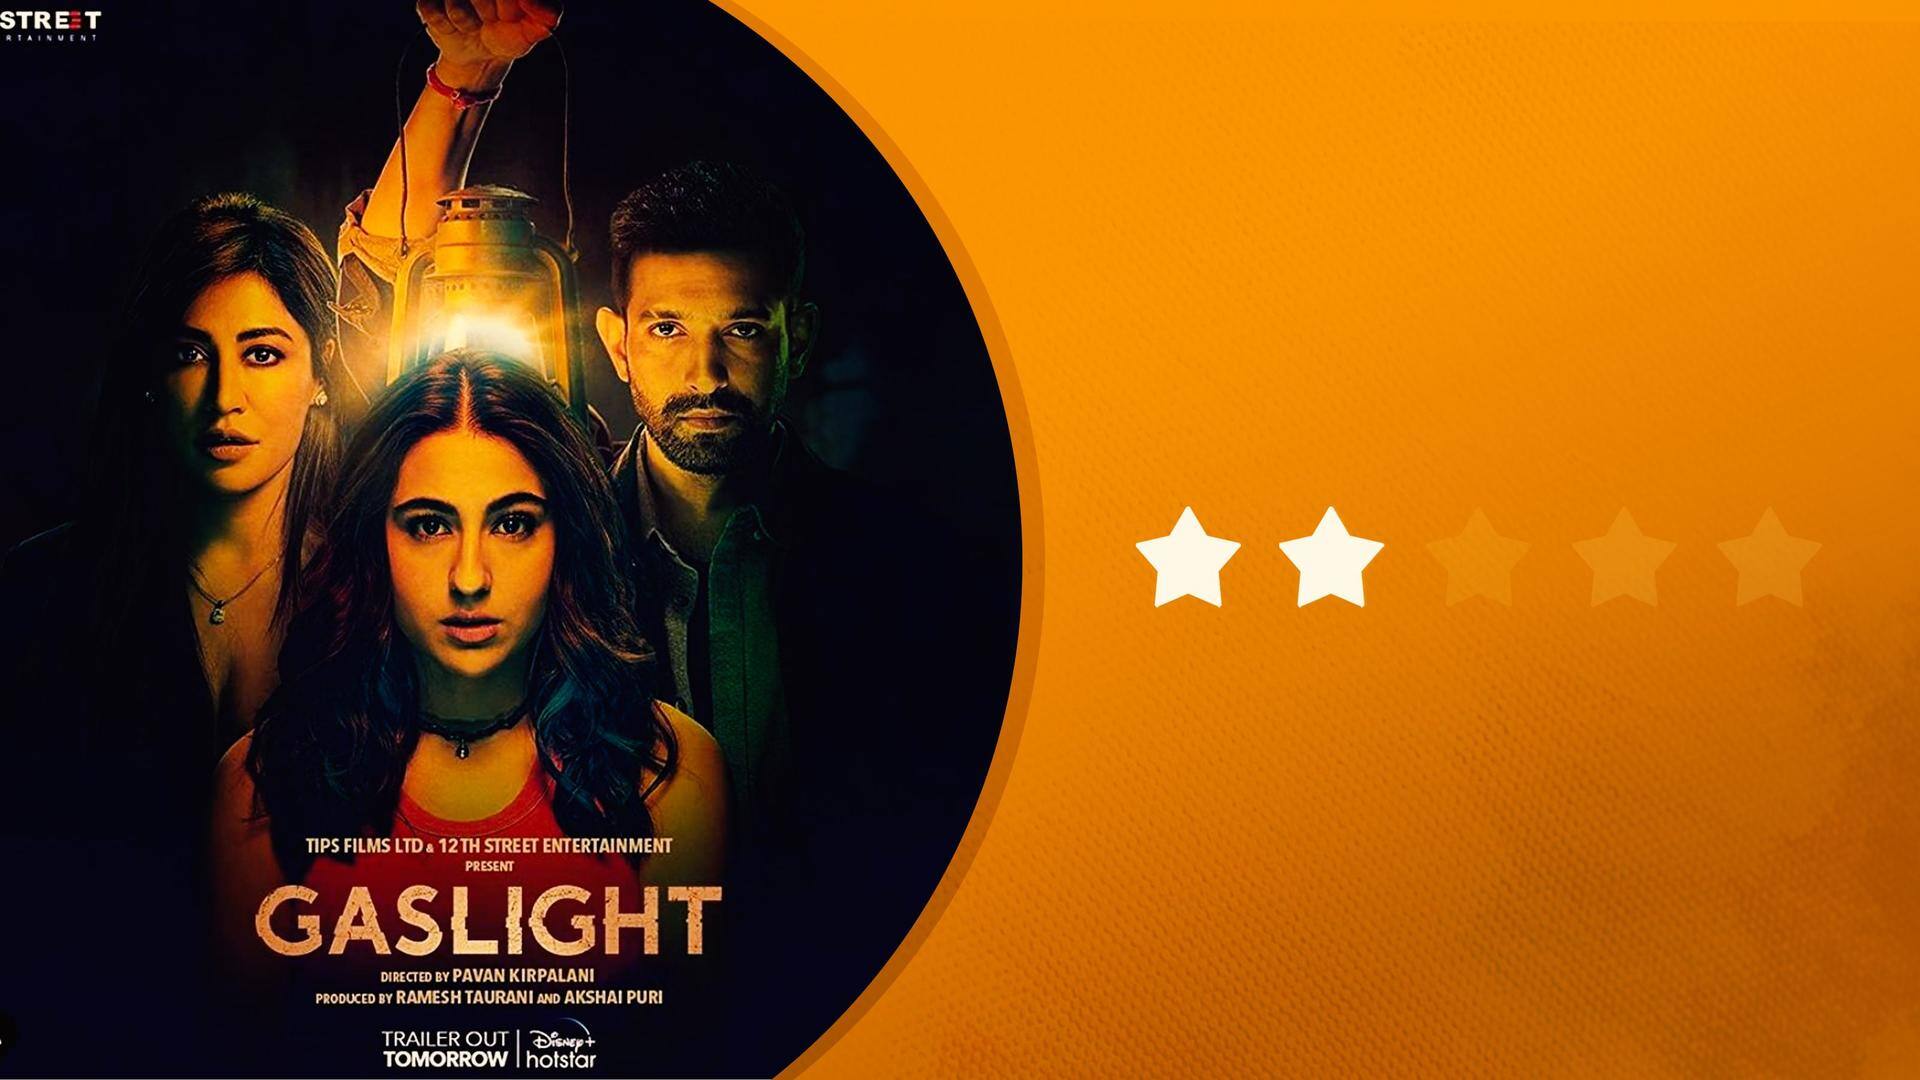 'Gaslight' review: Predictable thriller bites more than it can chew